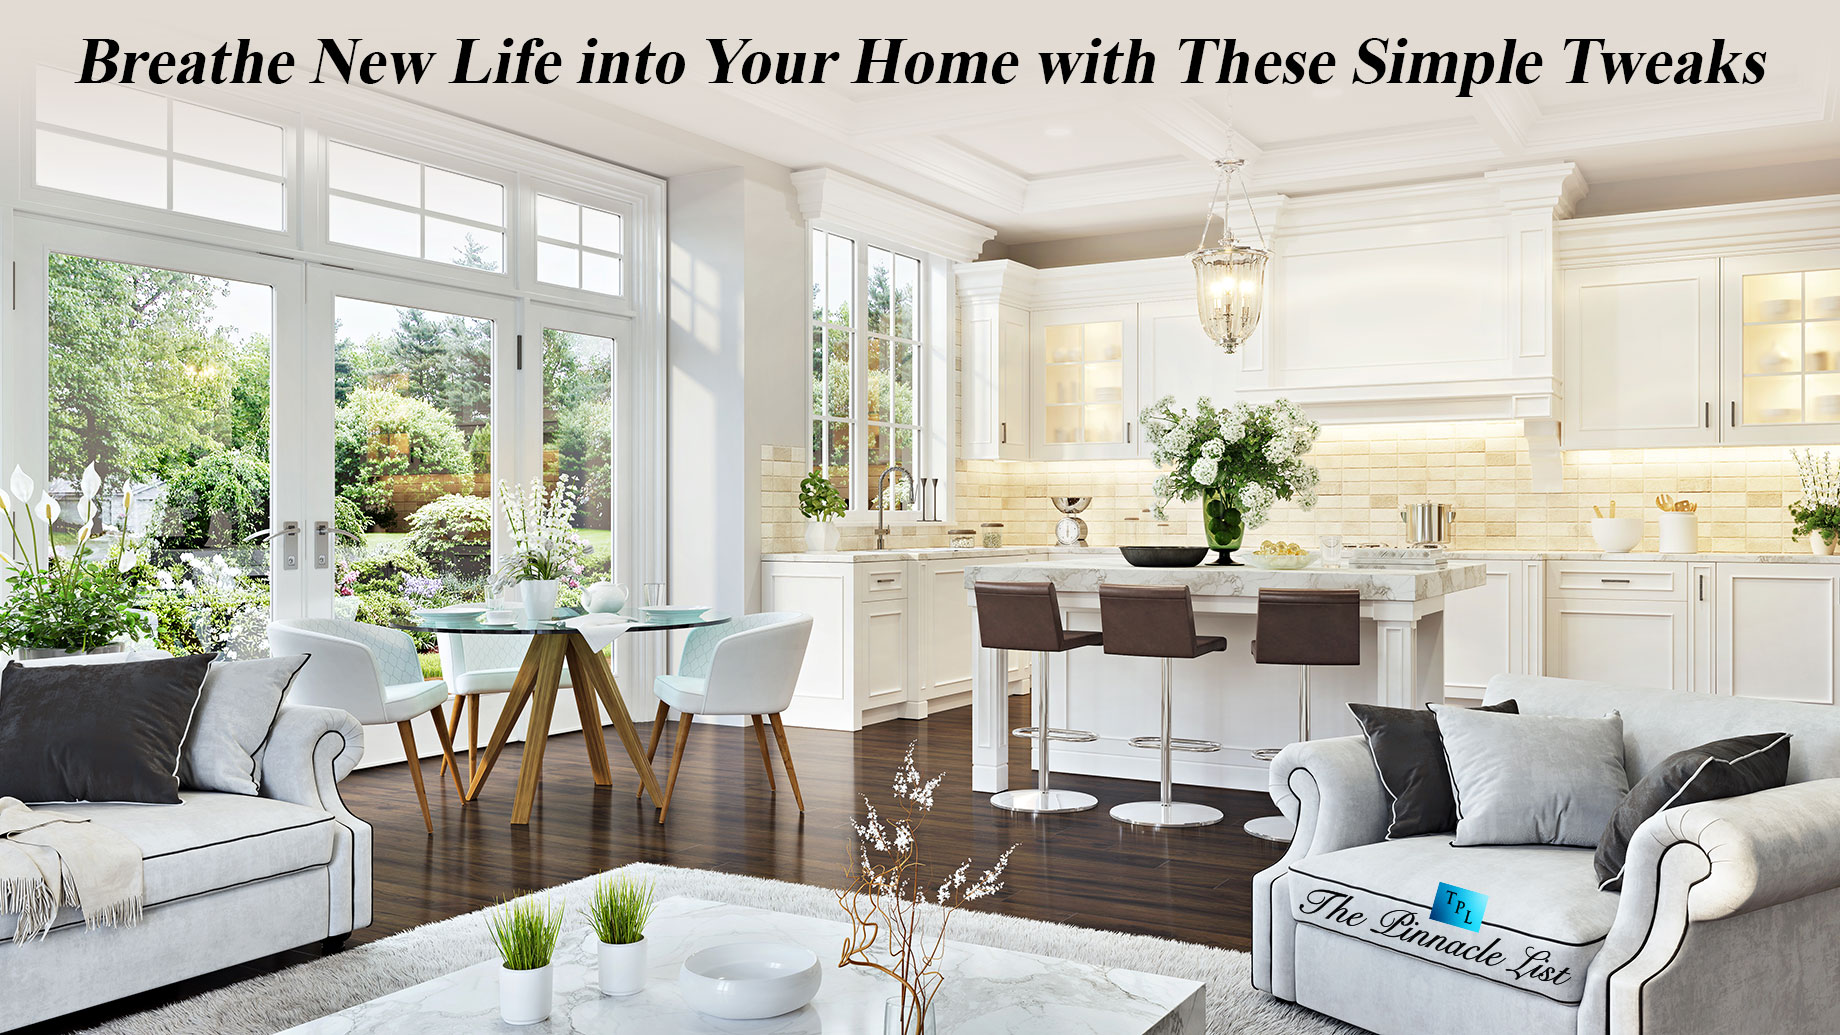 Breathe New Life into Your Home with These Simple Tweaks